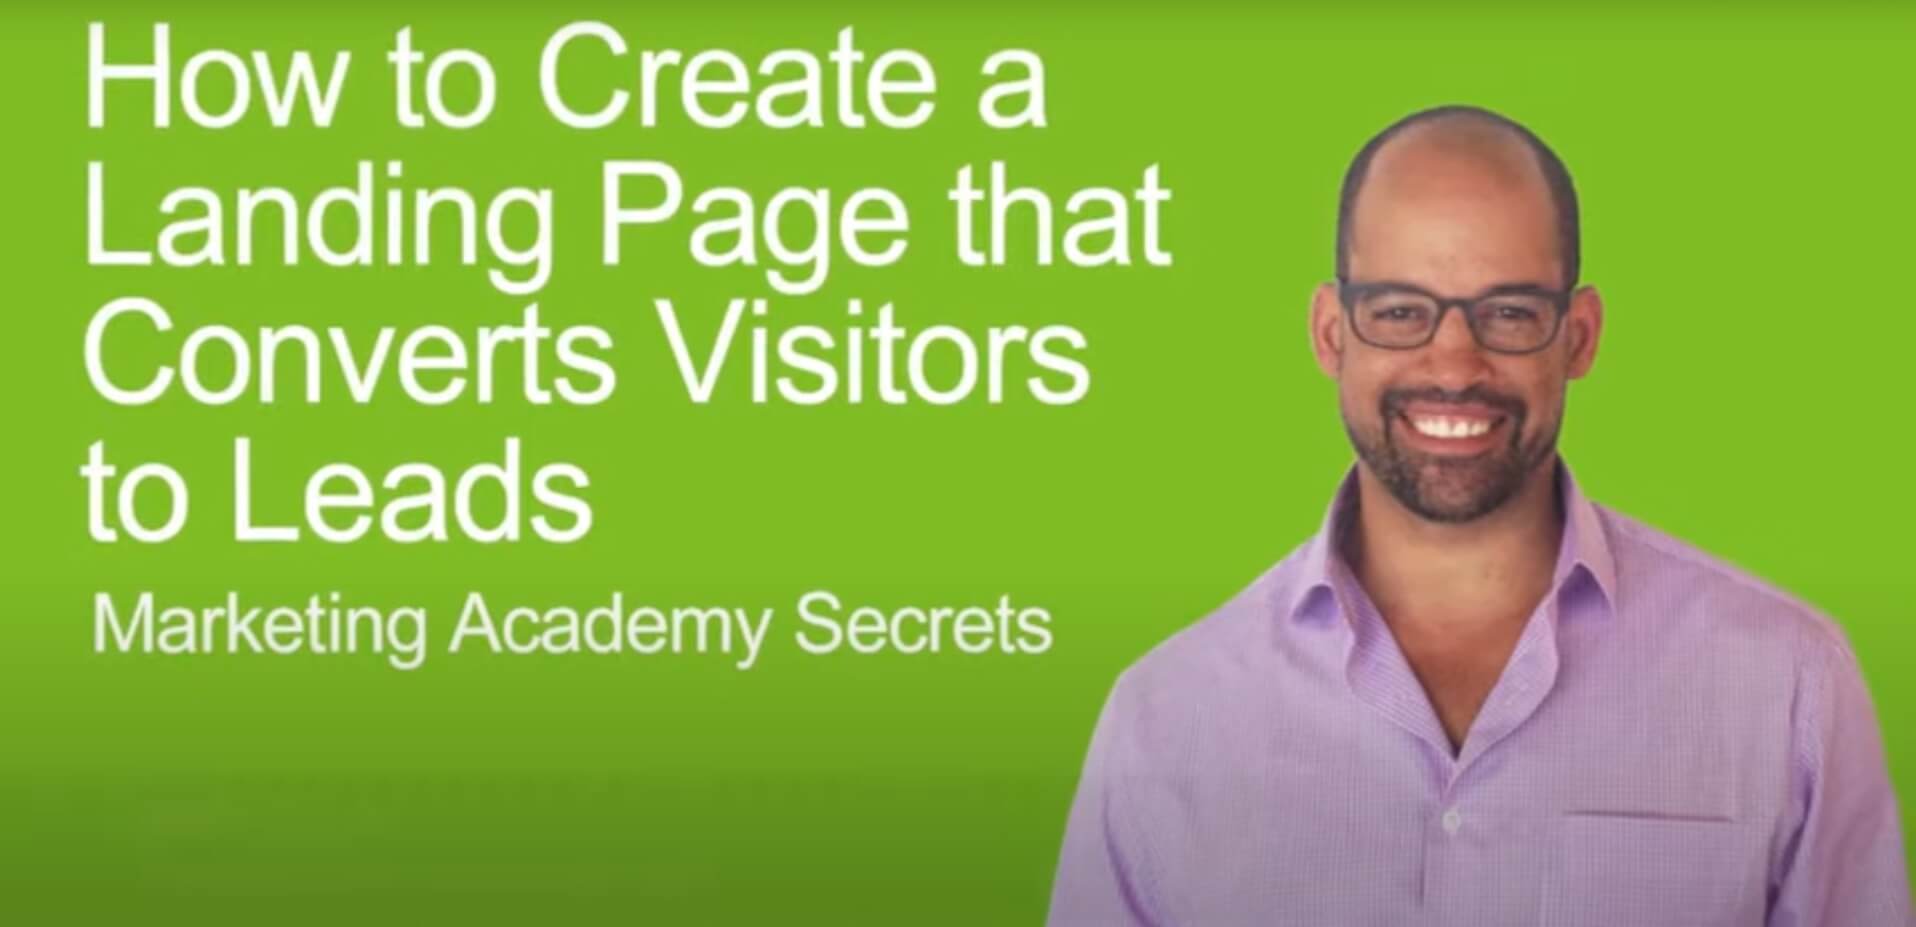 [Video] Marketing Academy Secrets #22 : How to Use Landing Pages to Convert Visitors to Leads